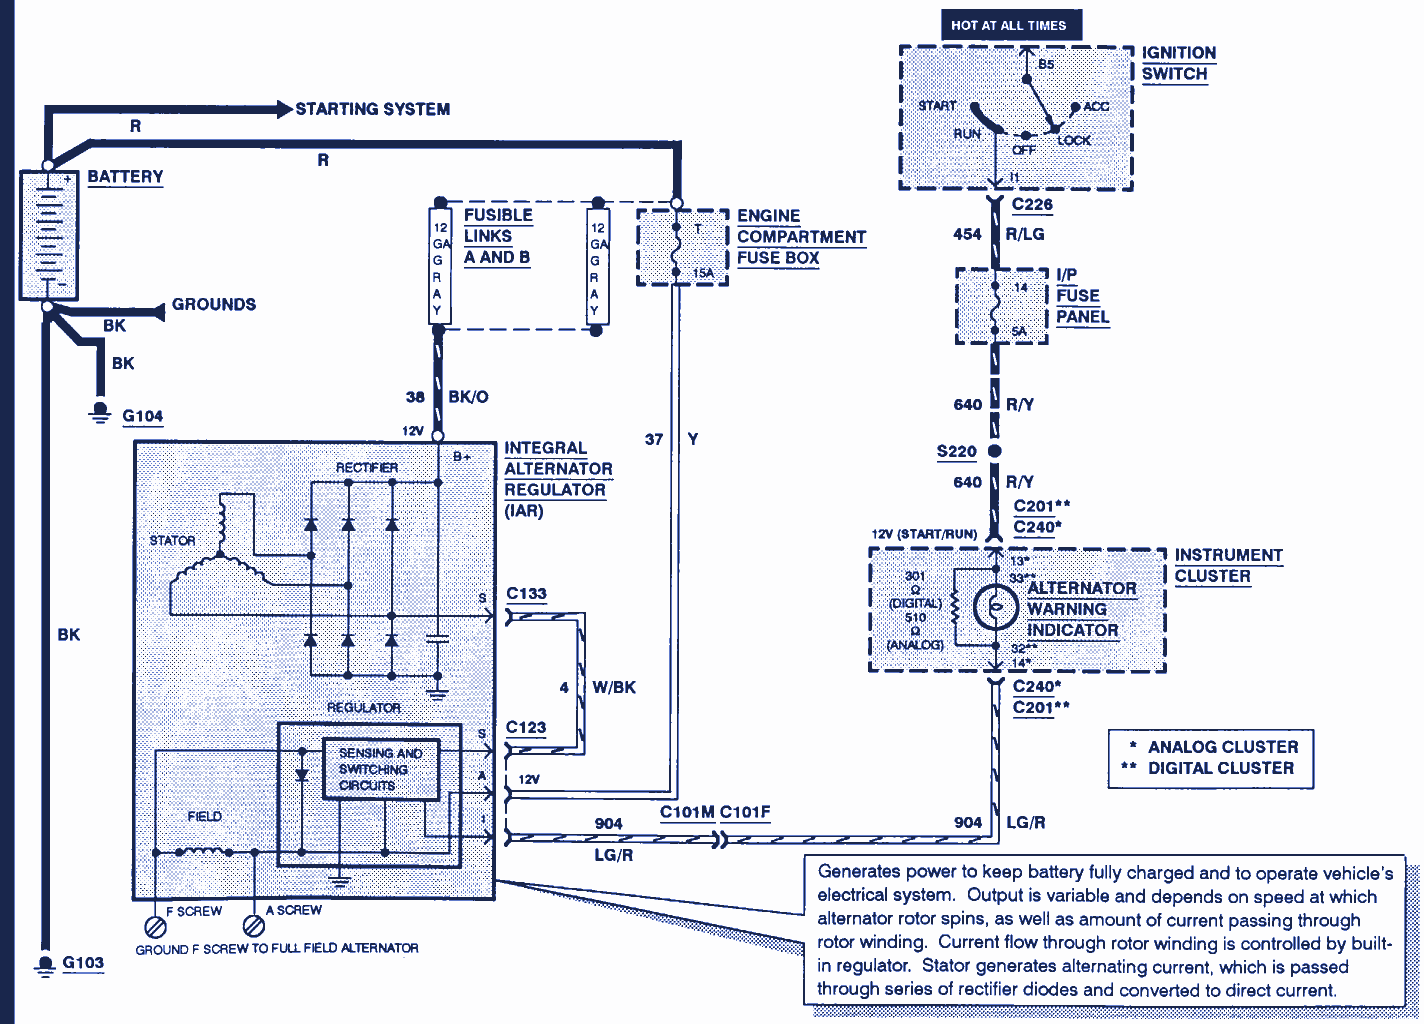 1998 Ford Expedition Wiring Diagram from 3.bp.blogspot.com